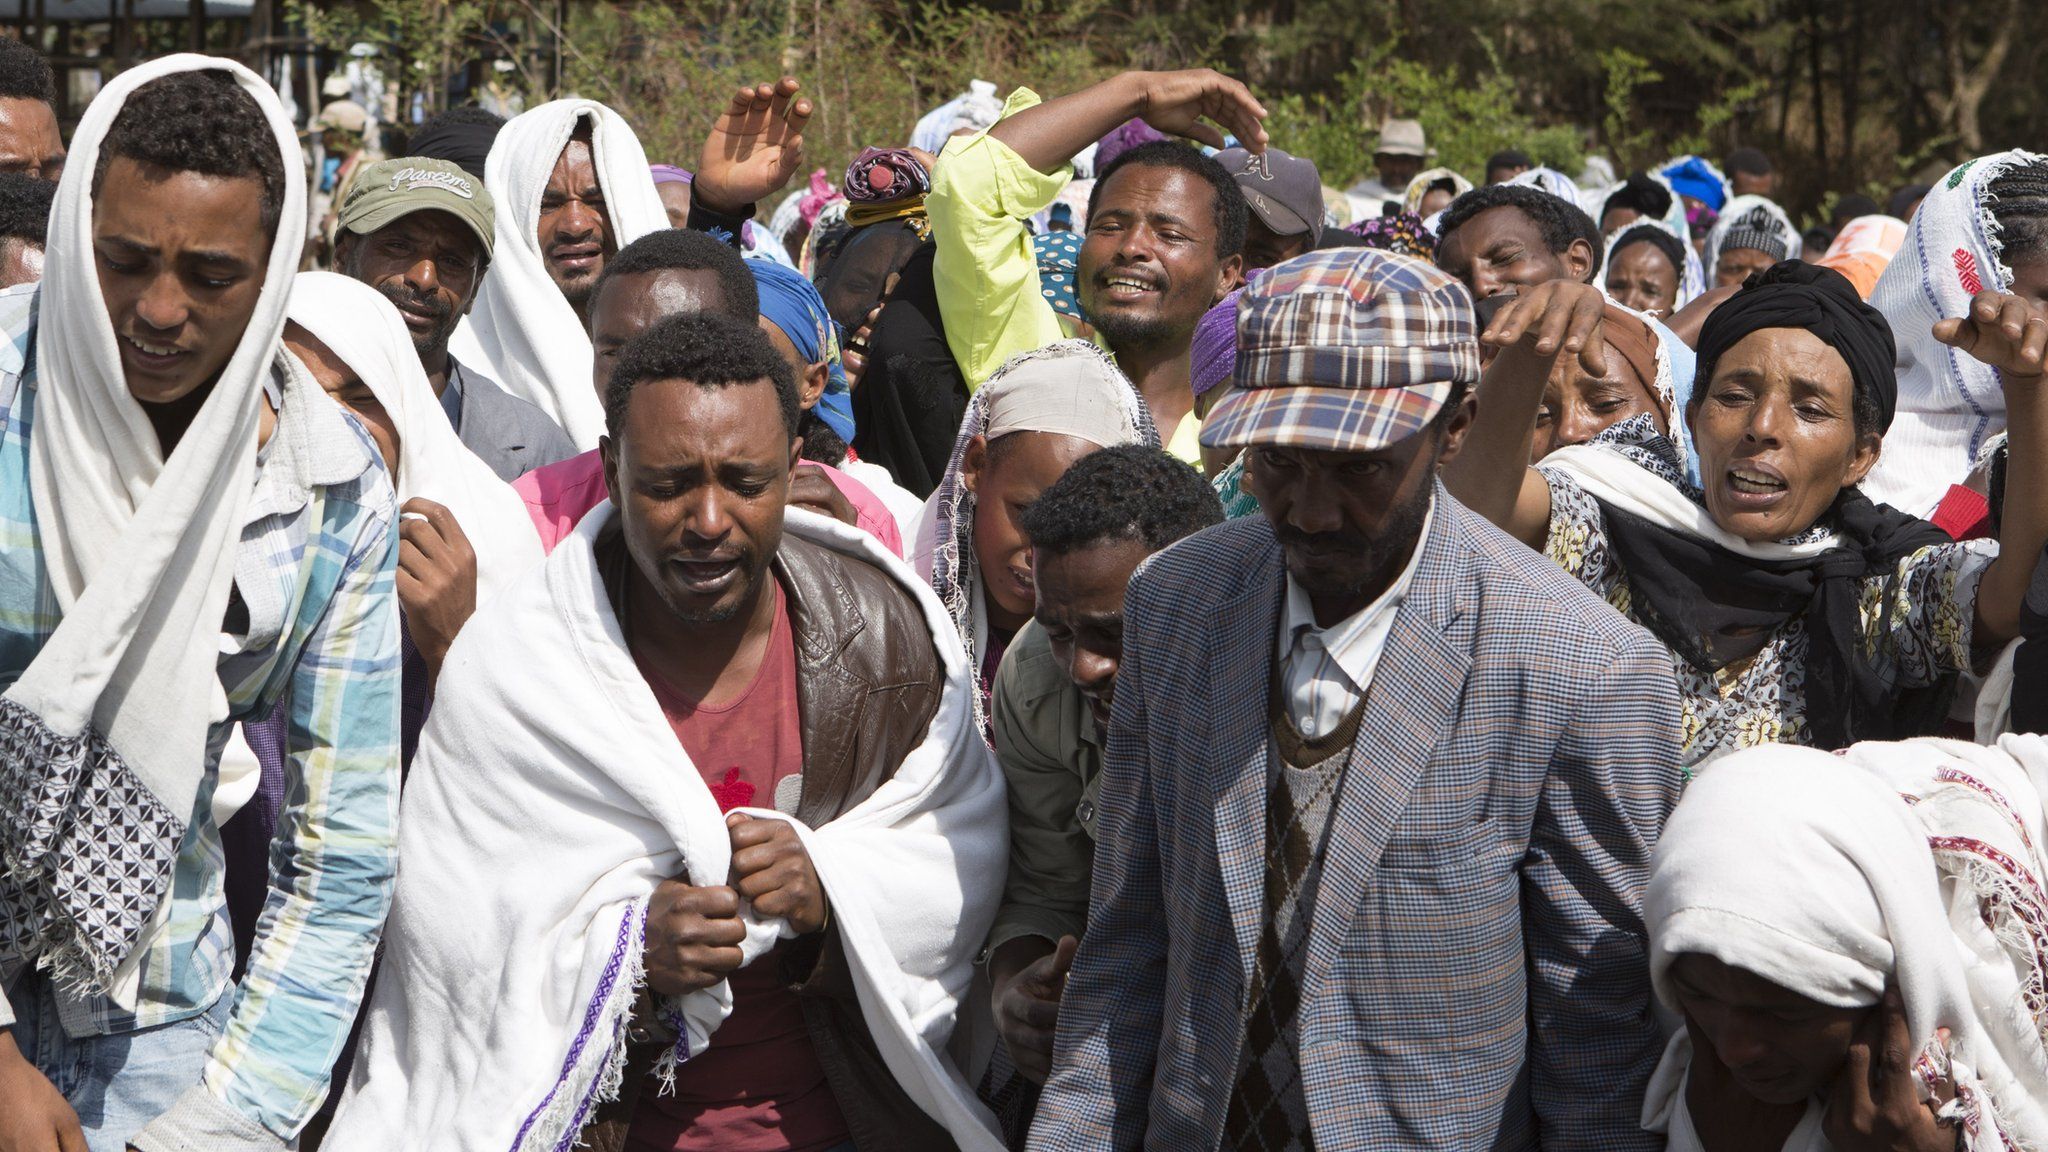 People mourn the death a man who was shot dead by the Ethiopian forces the day earlier, in the Yubdo Village, about 100km from Addis Ababa in the Oromia region, on 17 December 2015